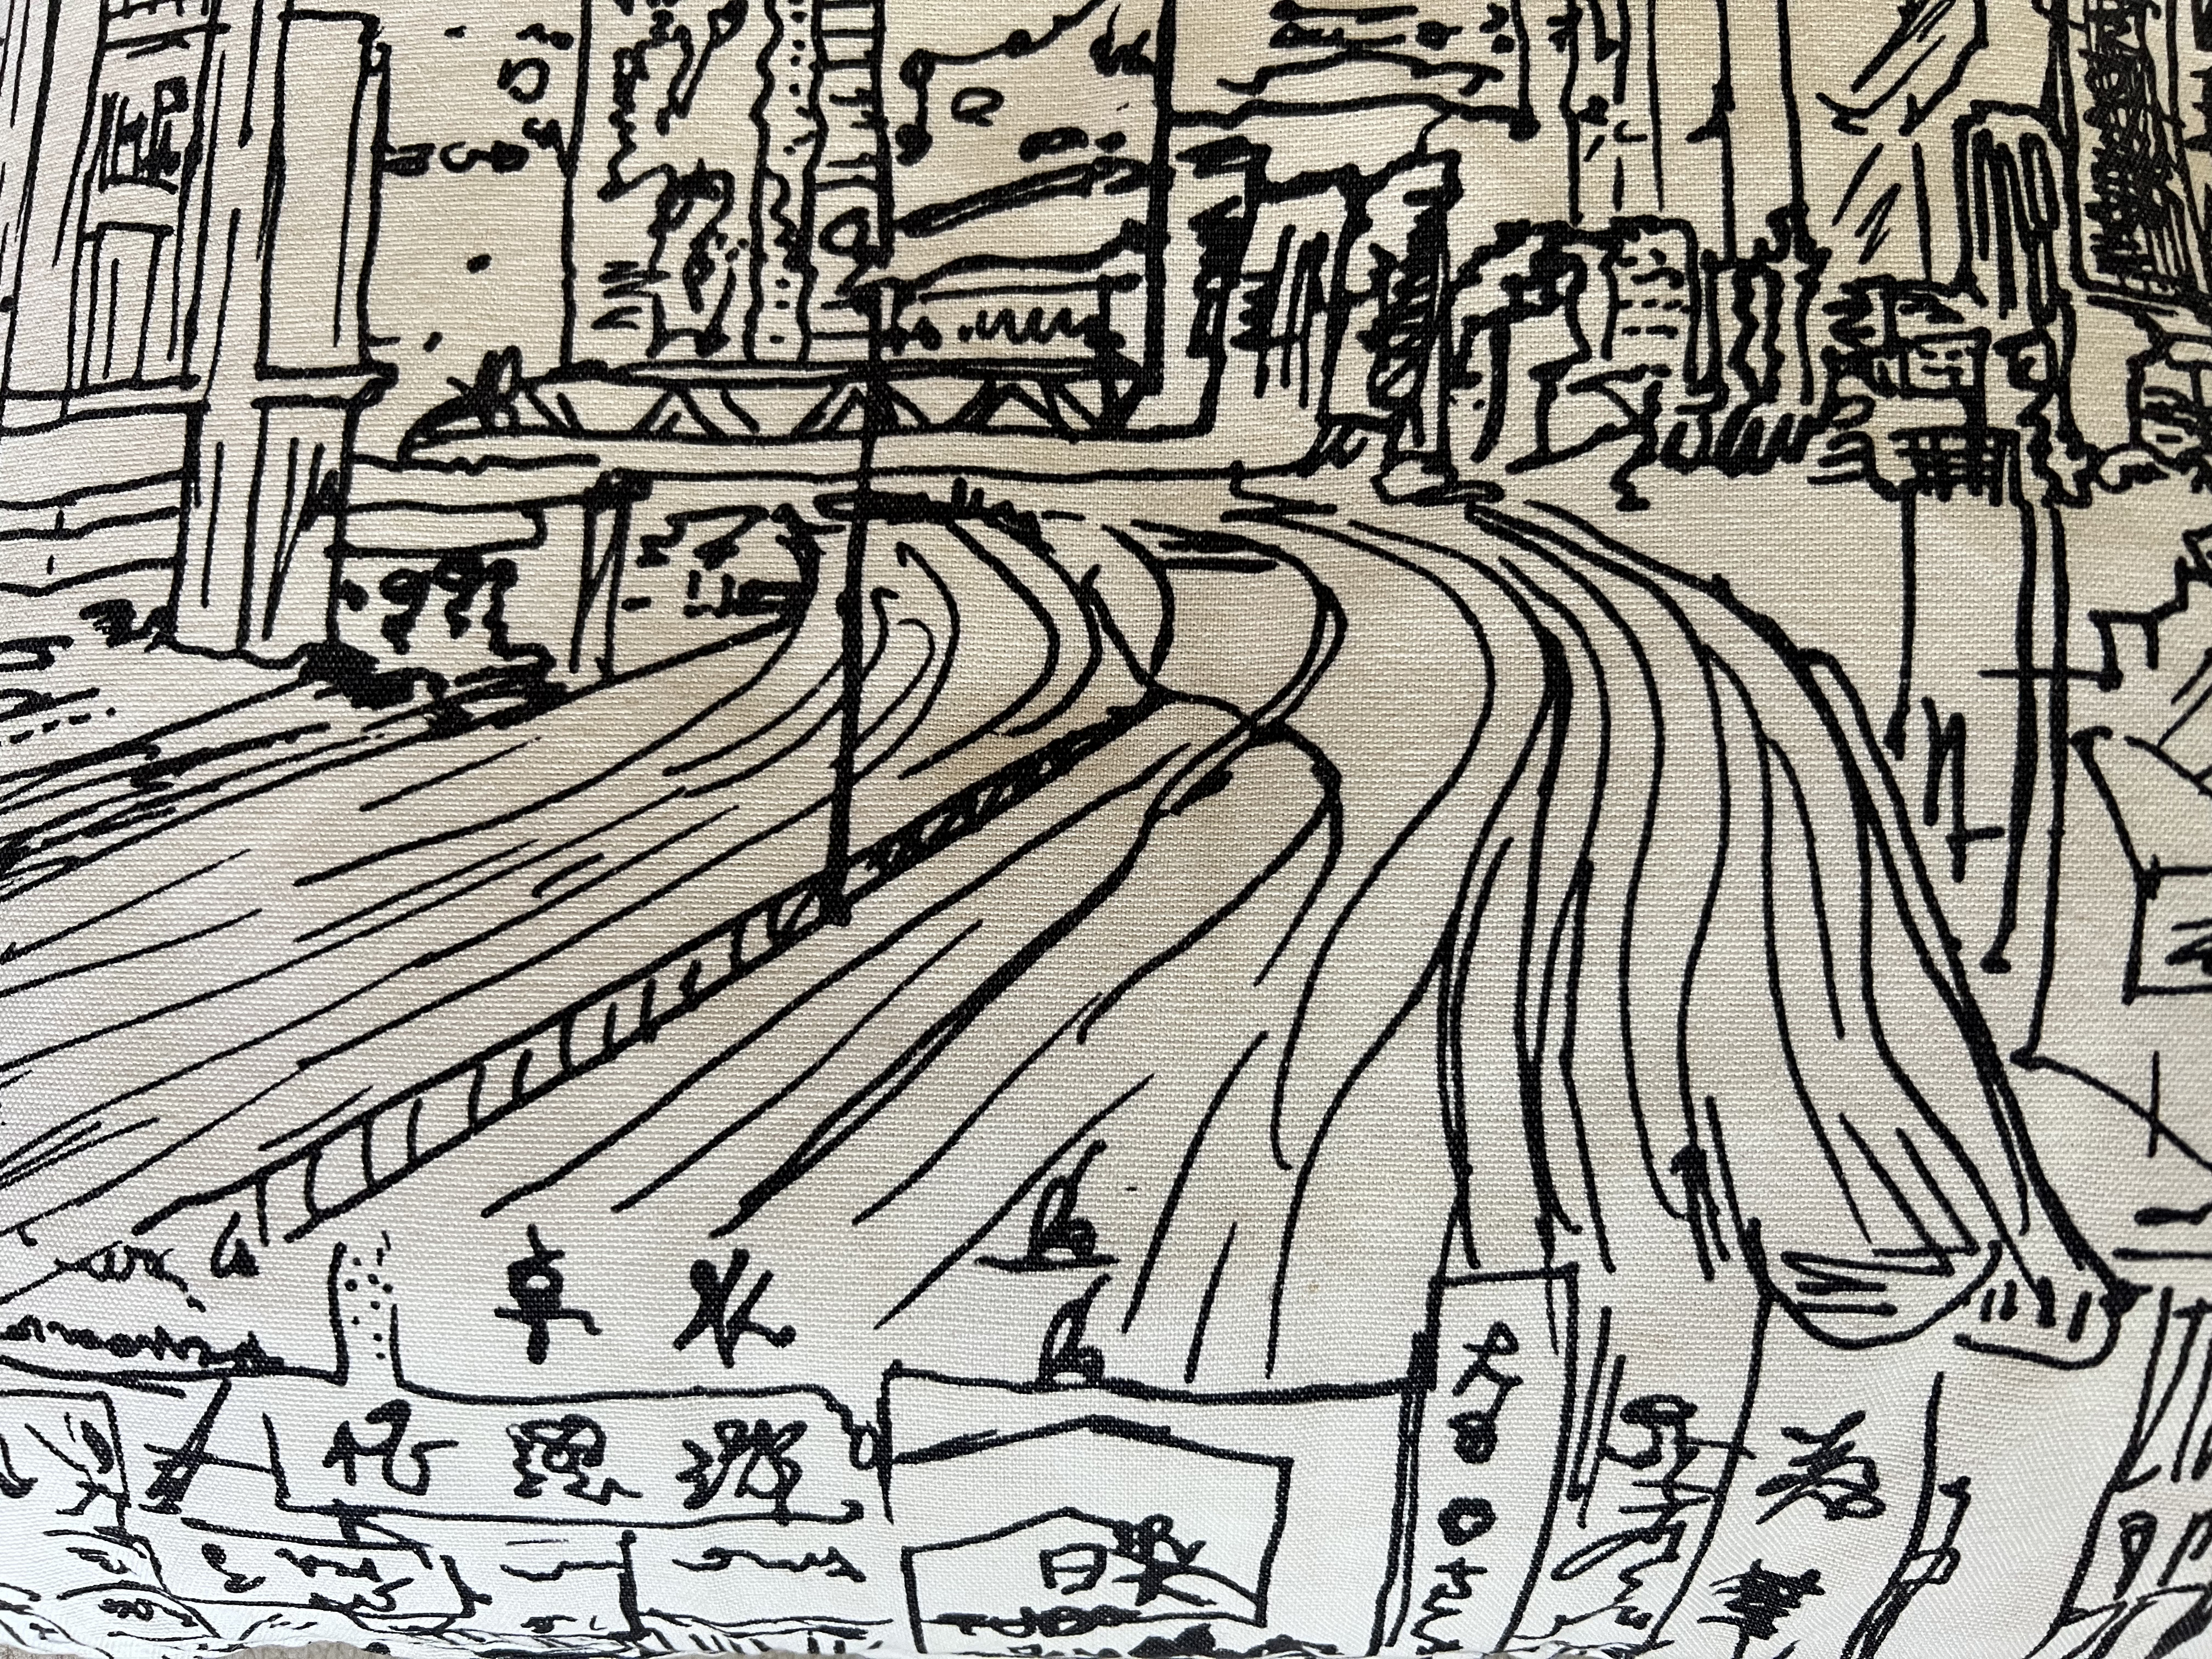 impressionistic sketch of flooding river or thoroughfare in Chinese city